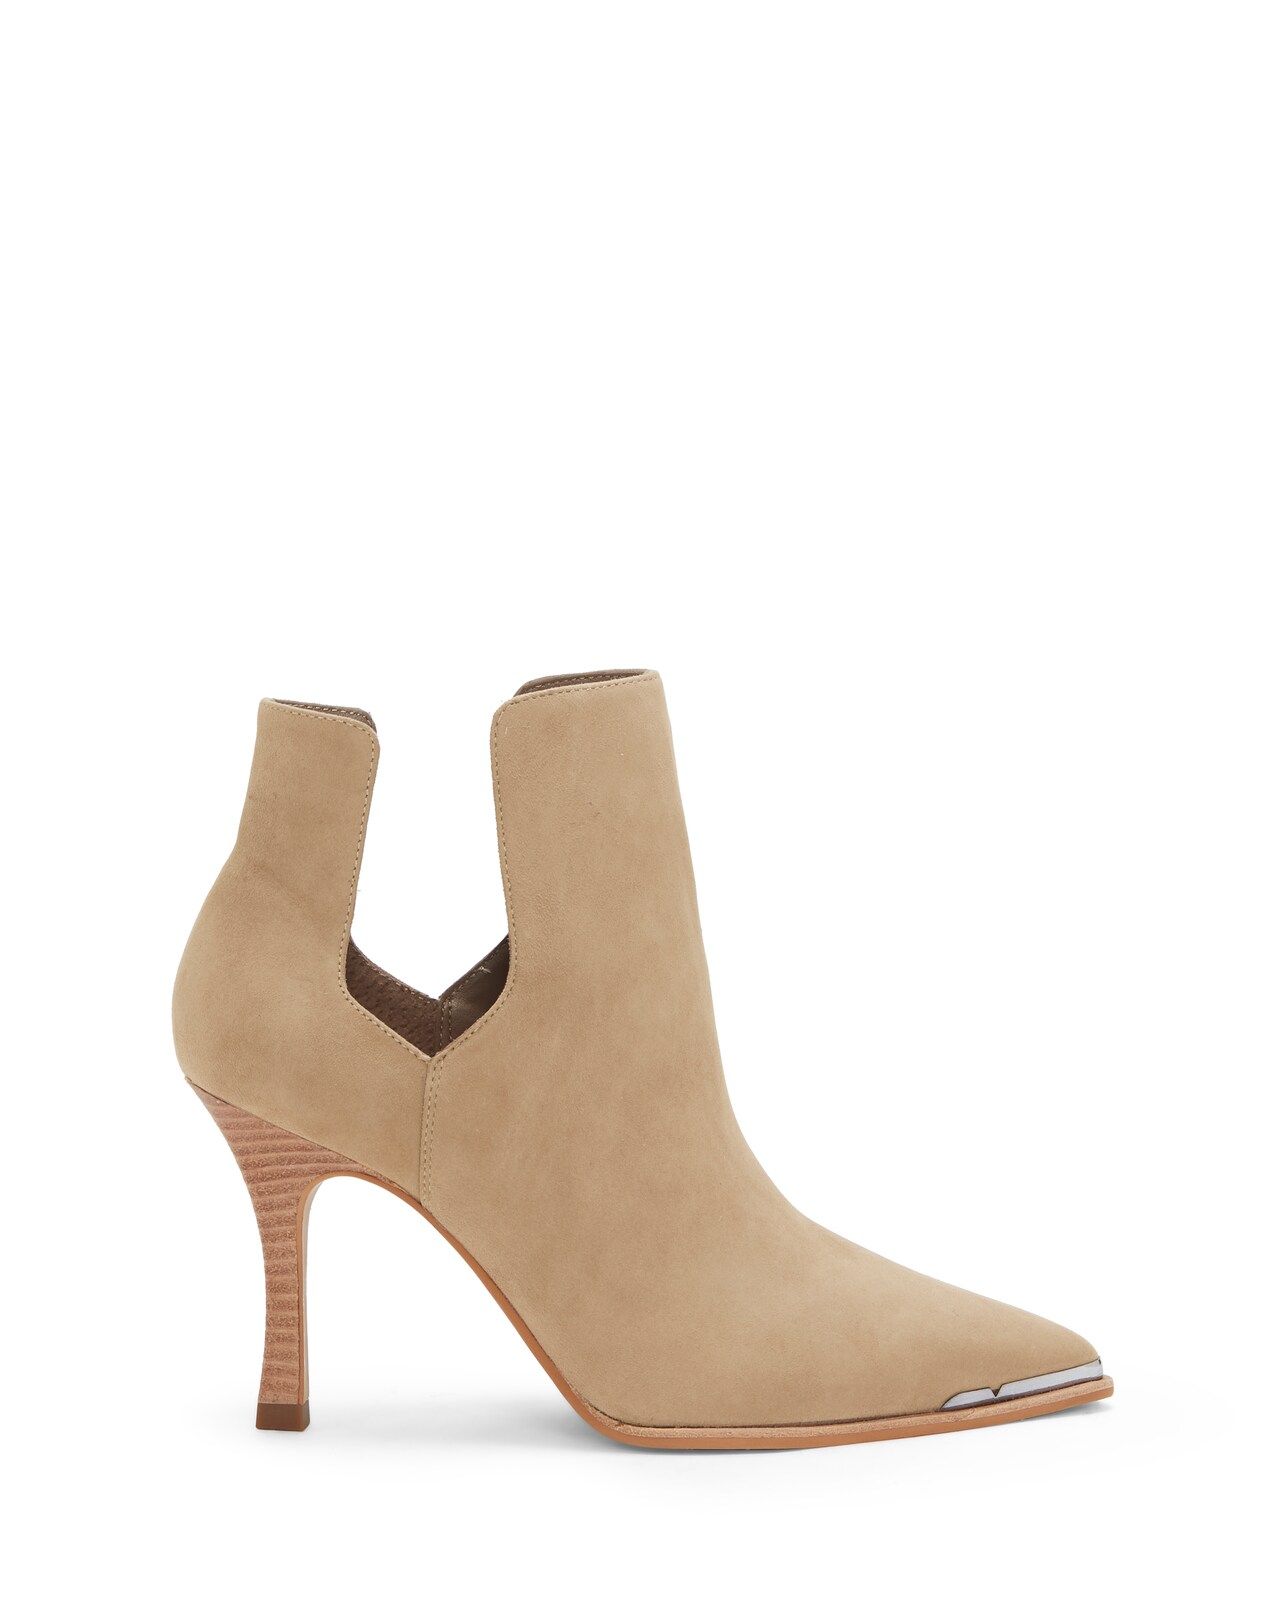 Frendin Point-Toe Bootie | Vince Camuto